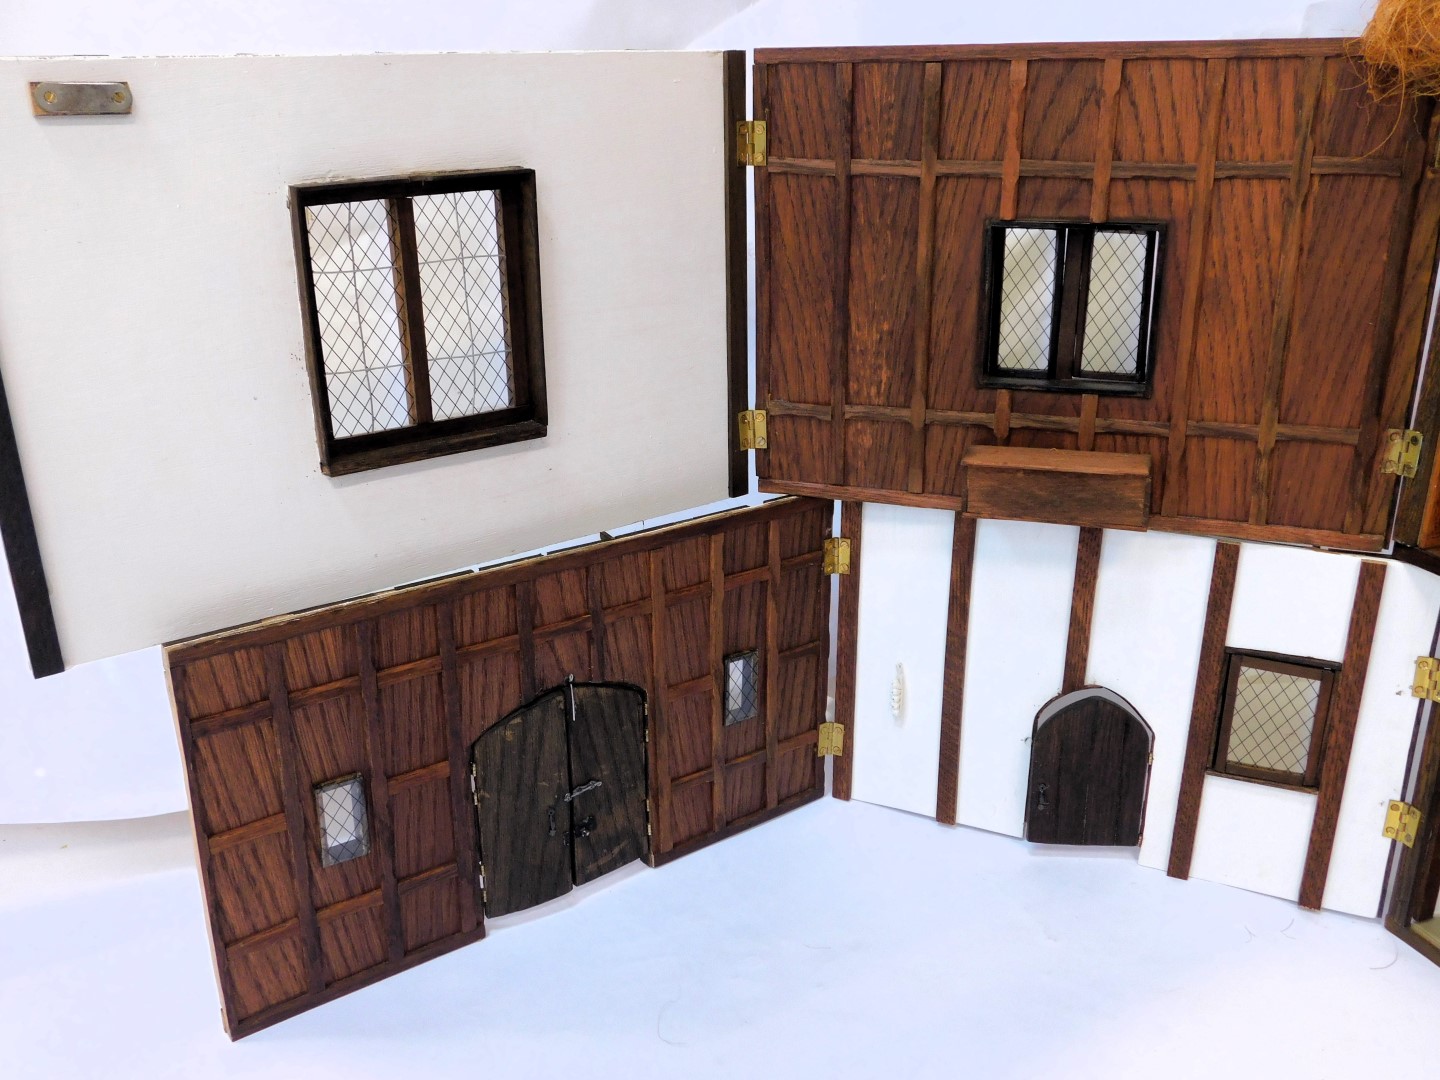 A three storey substantial Tudor style doll's house, with three chimneys, thatched roof, in painted - Image 8 of 10